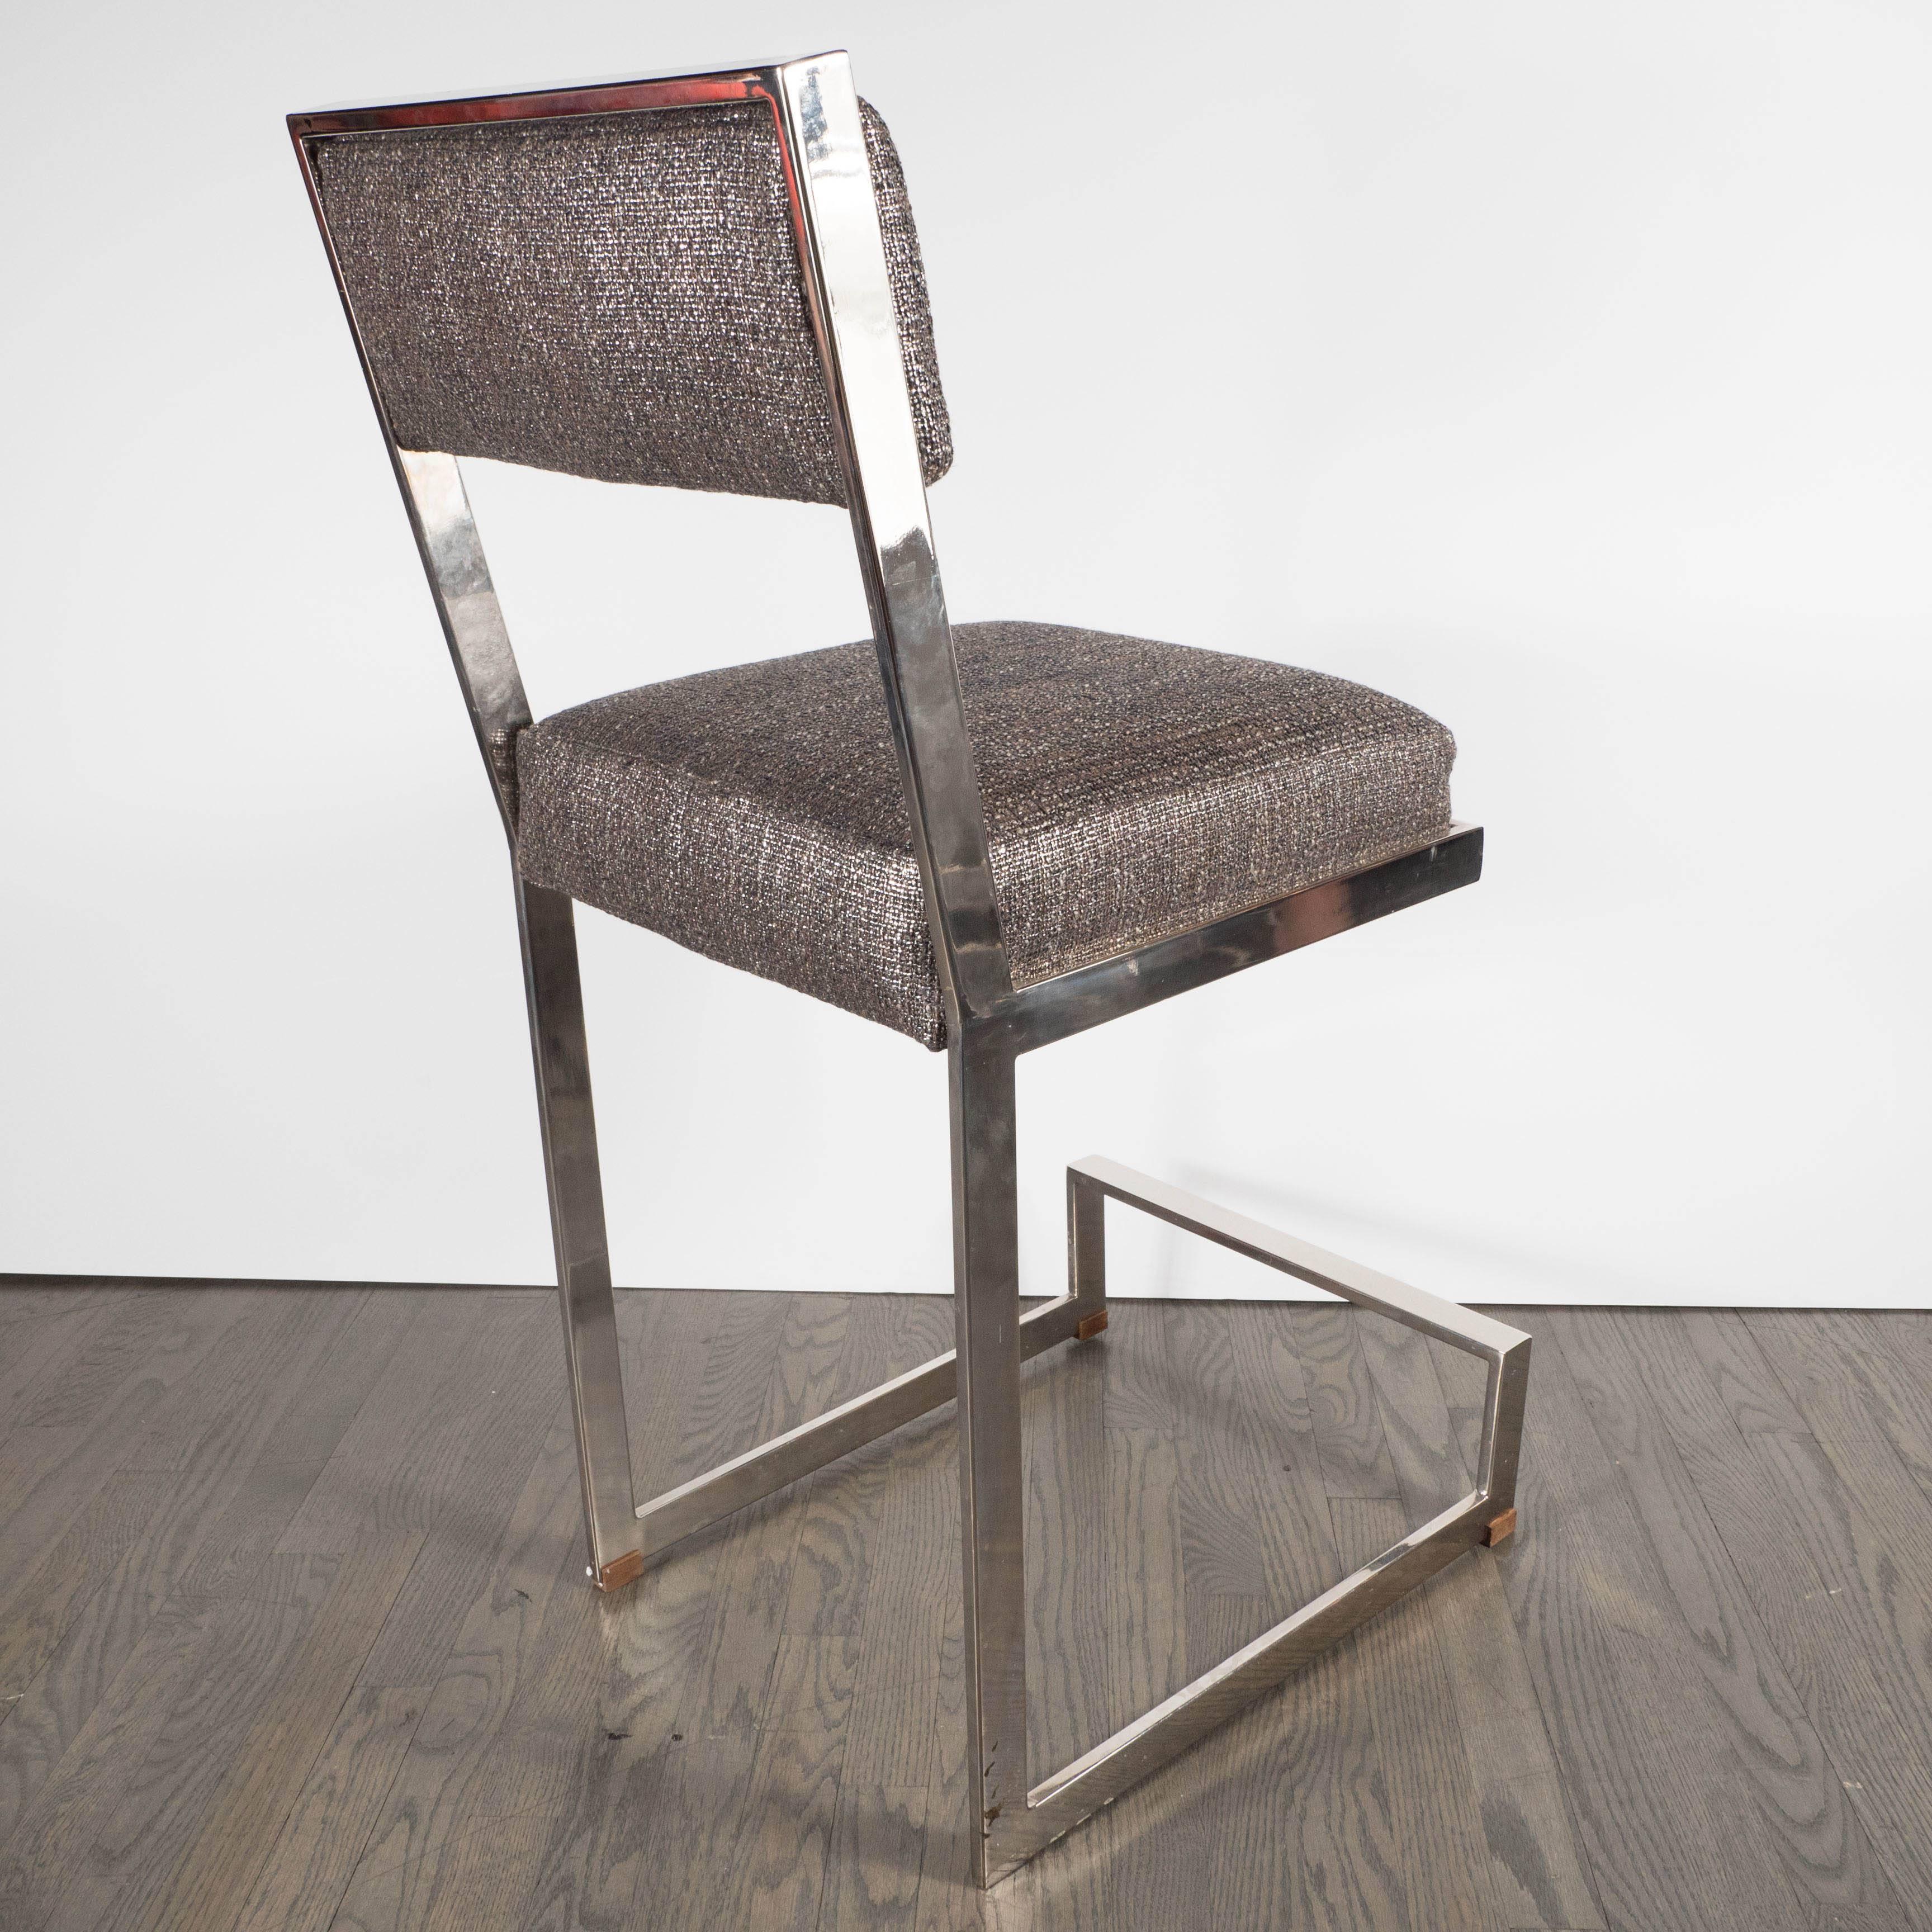 Late 20th Century Set of Four Mid-Century Modernist Cantilever Bar Stools by Milo Baughman